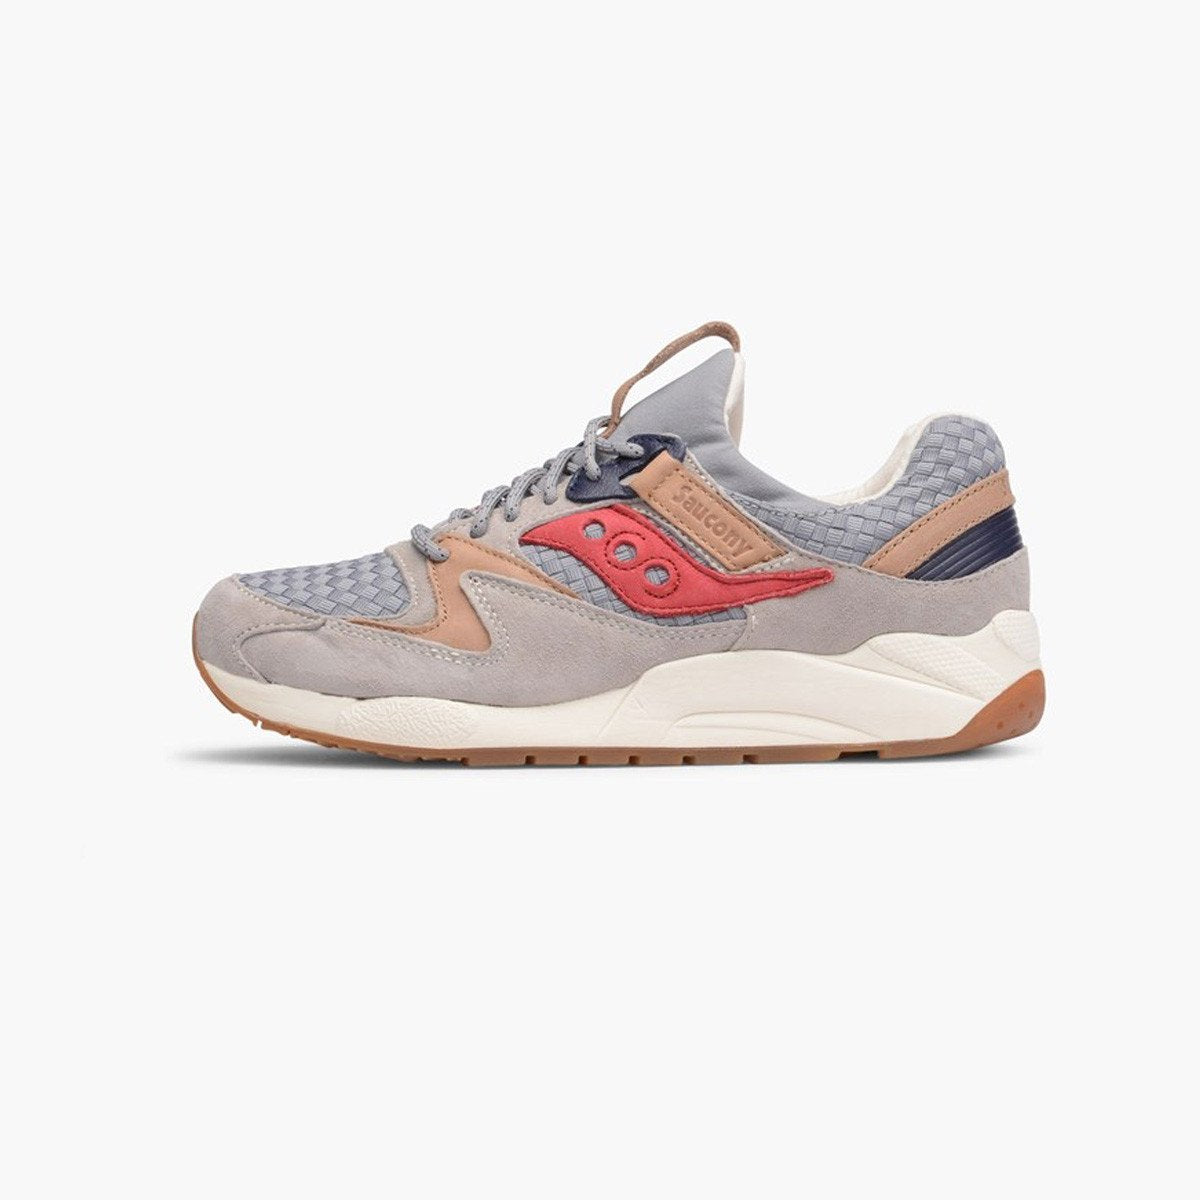 saucony grid 9000 limited